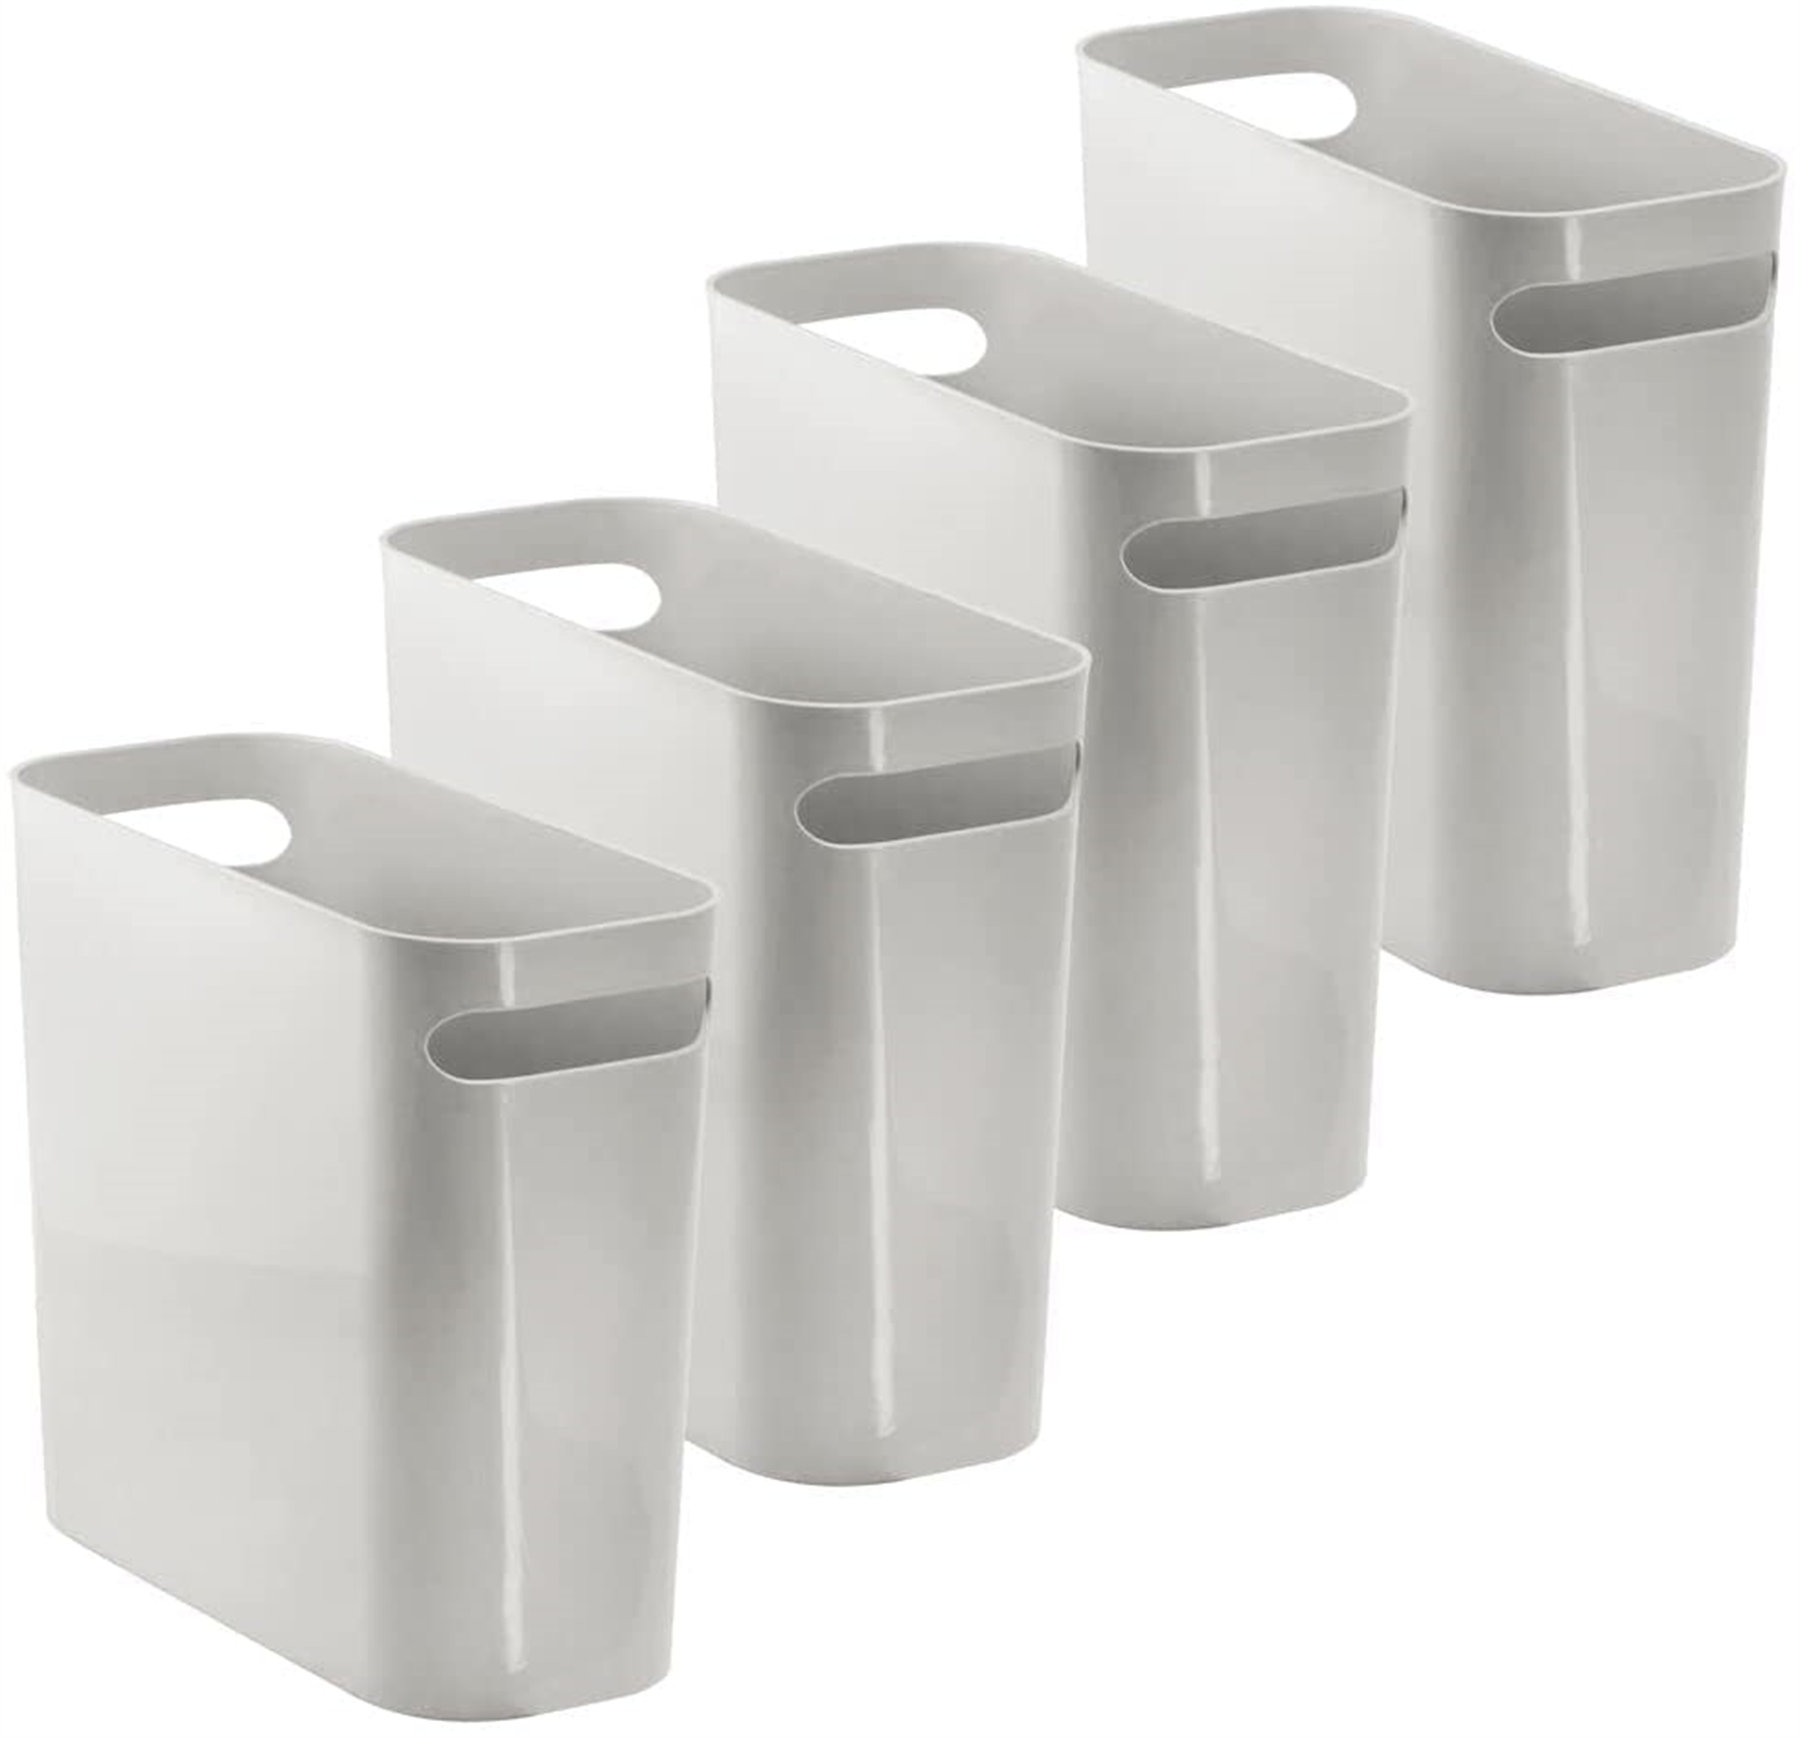 Deskside Wastebasket XSHION Trash Can 3 Pack Square Garbage Can Small Recycling Bins for Kitchen Bathroom Bedroom 